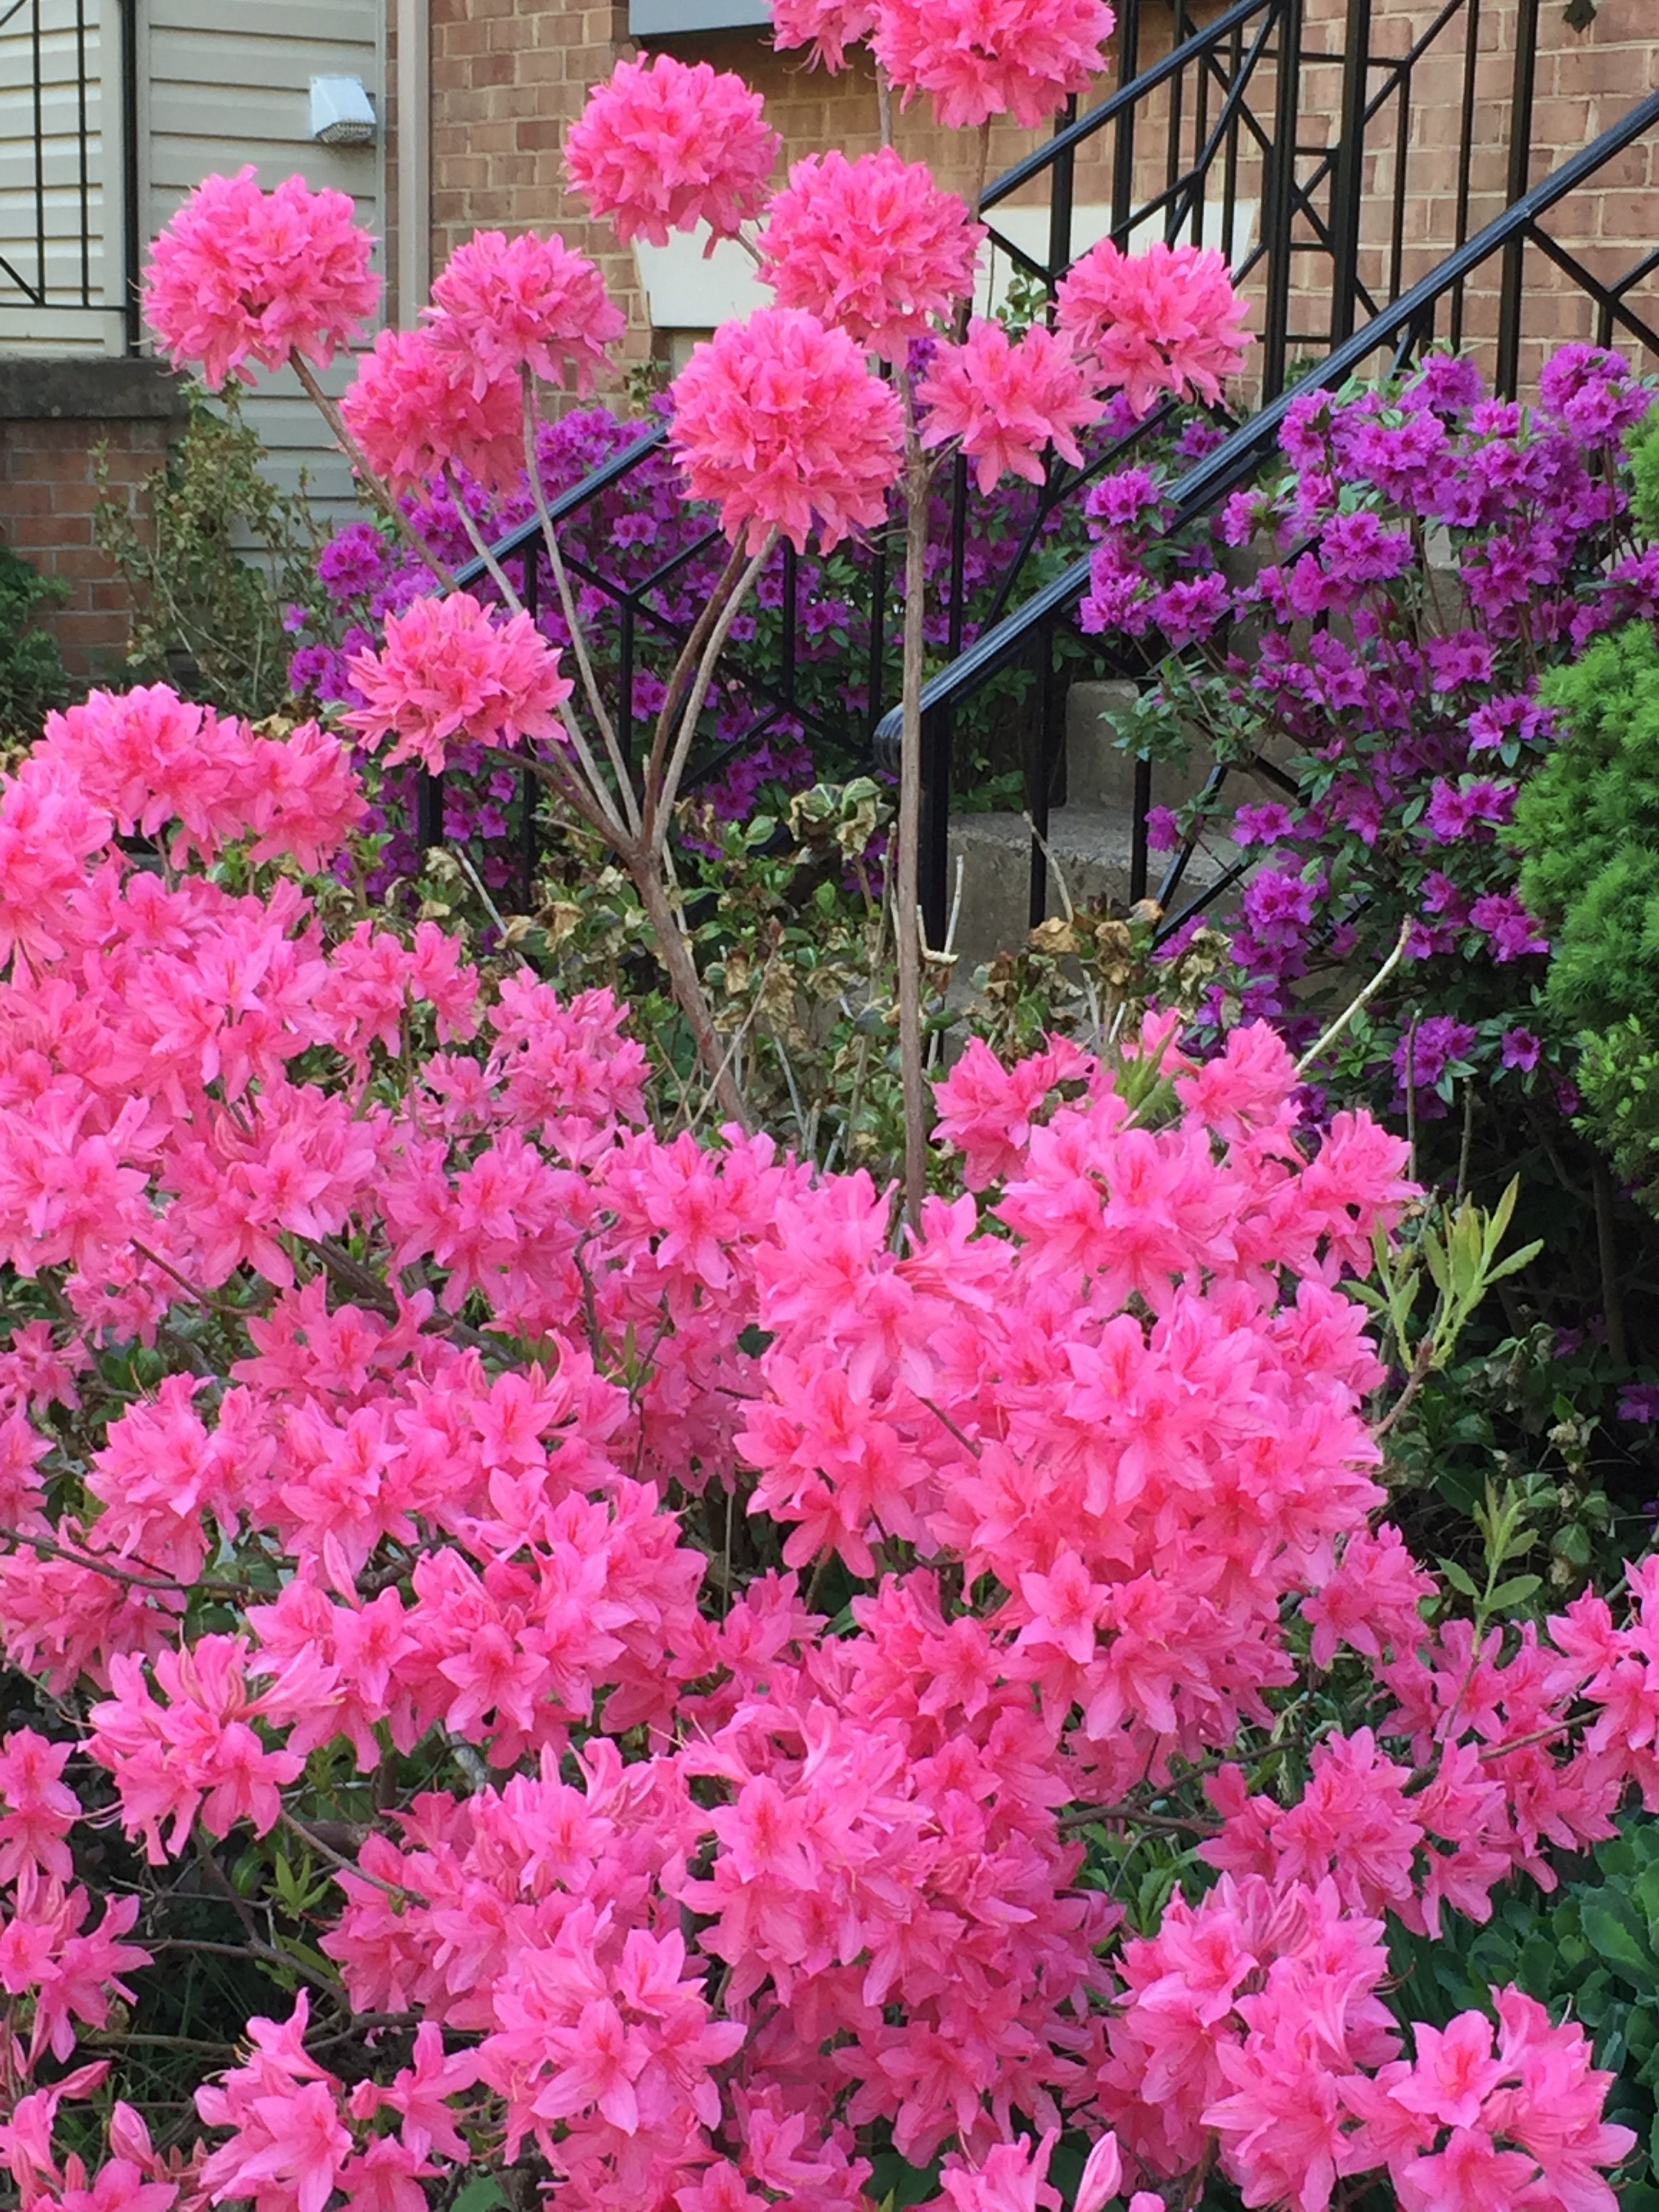 Local Delivery Kurume Hybrid Winter Plant Spring Planting Foliage Sun Shrubs Flowering Soil More Information Container Azalea Mother's Day Winter Plant Spring Foliage Shrub Sun Flowering